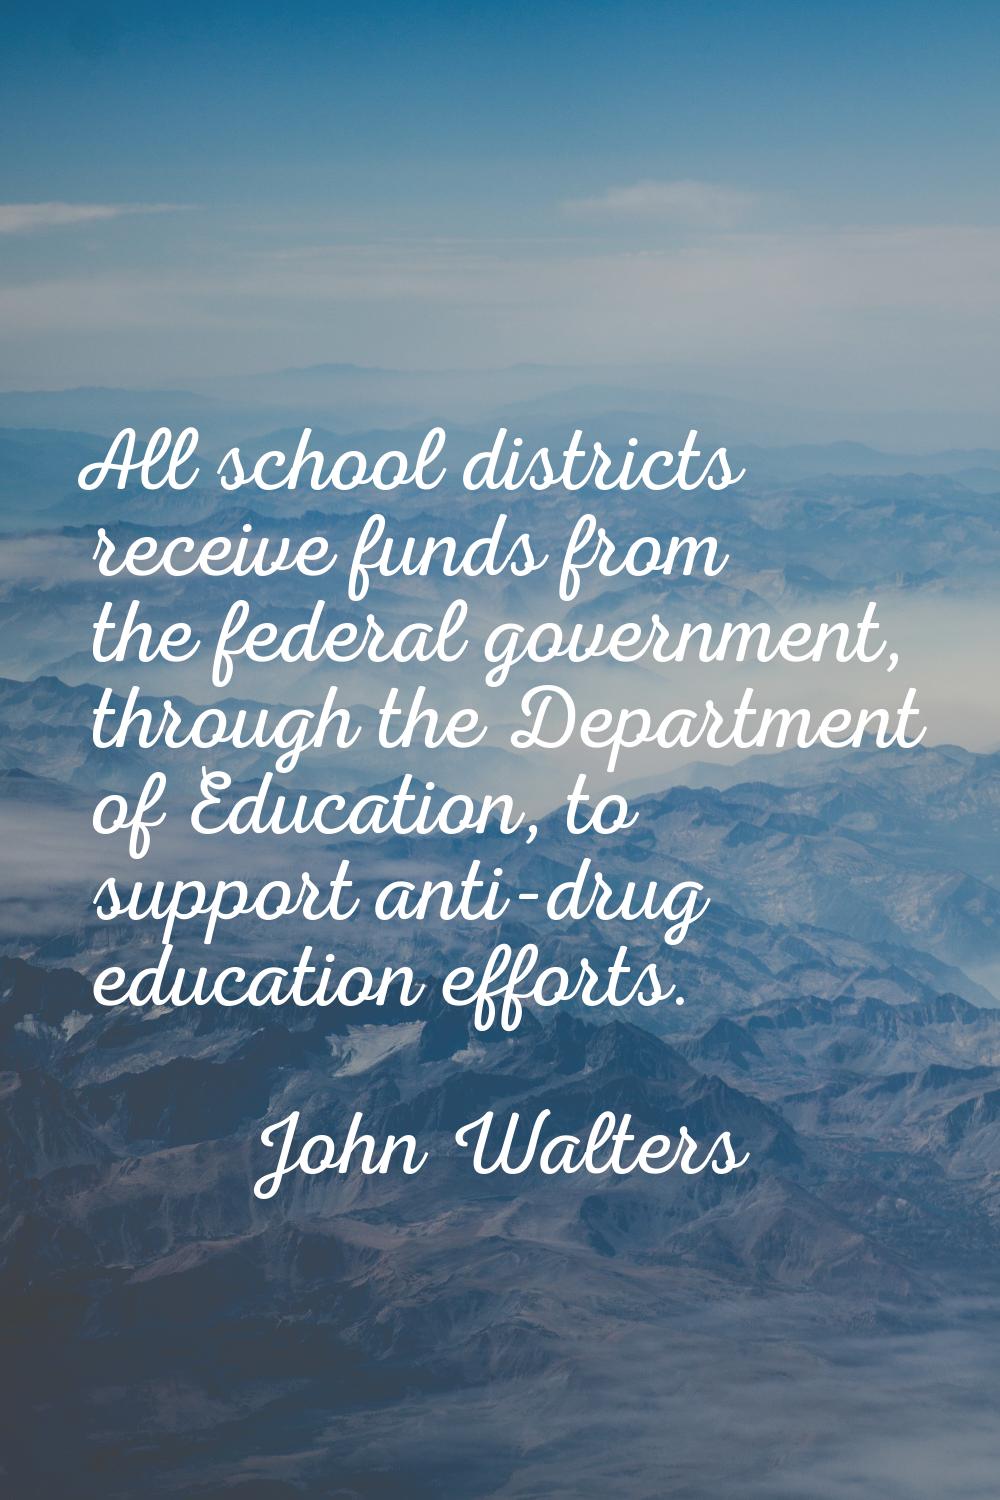 All school districts receive funds from the federal government, through the Department of Education